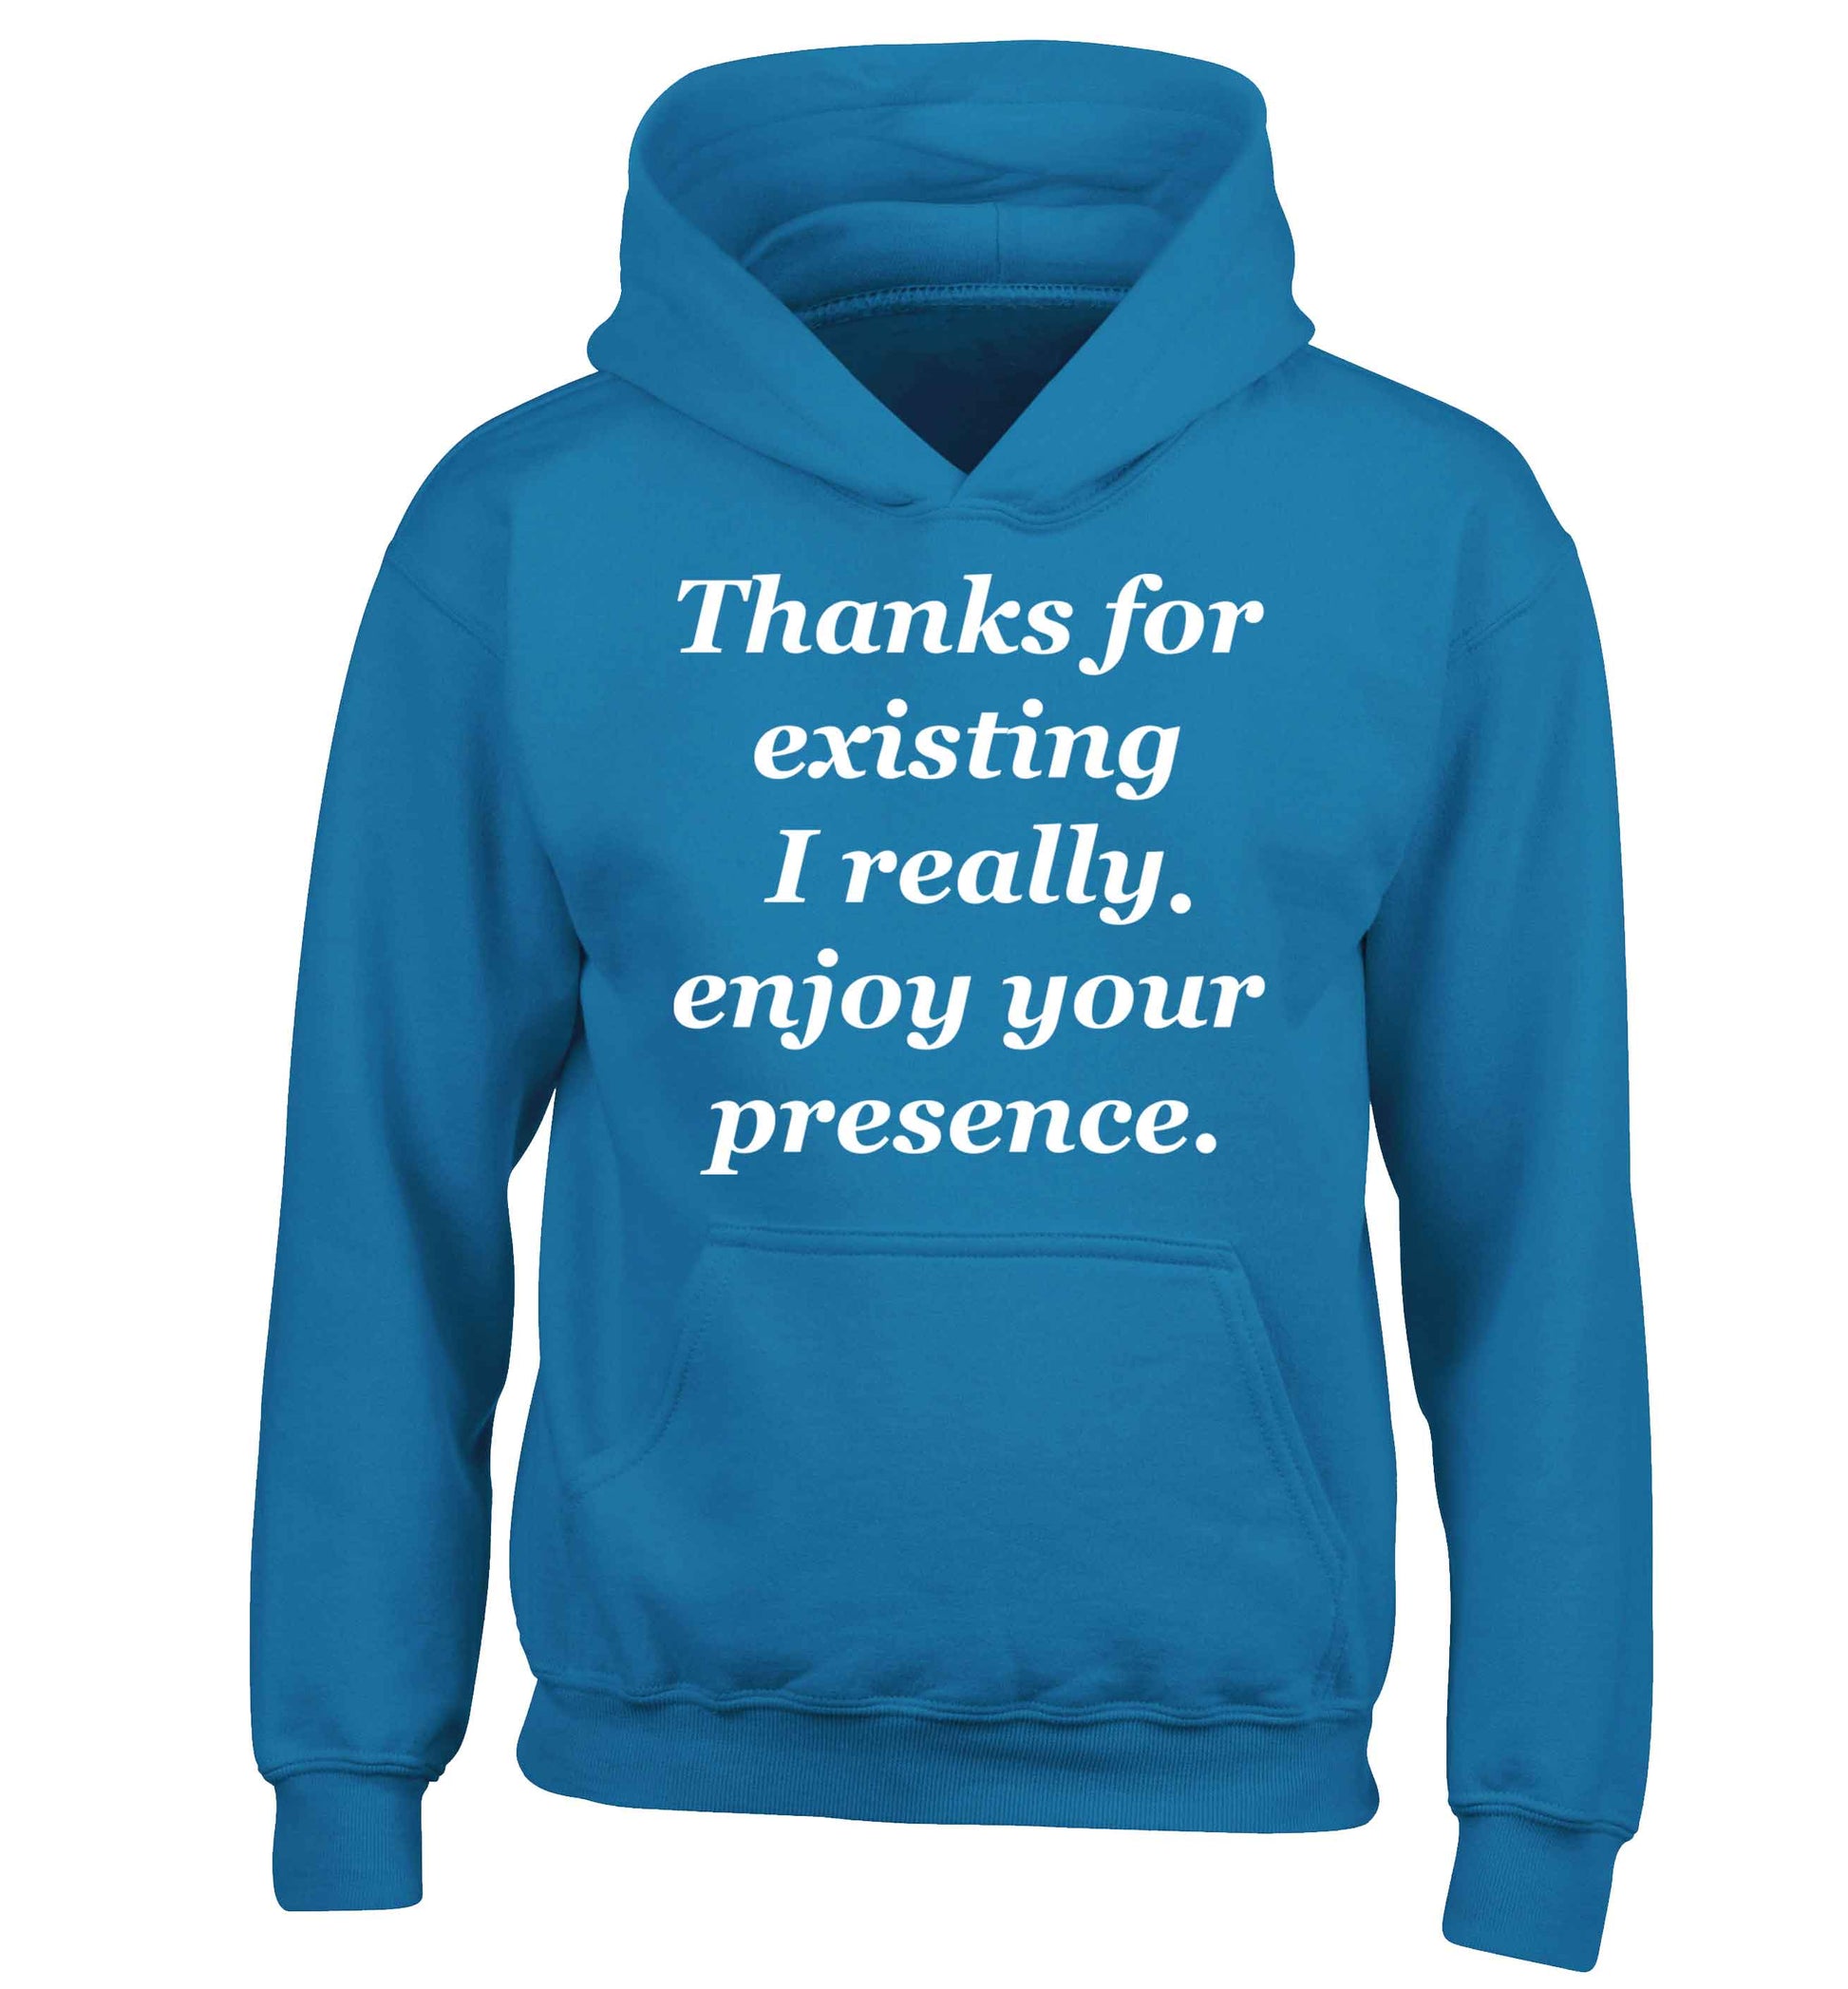 Thanks for existing I really enjoy your presence children's blue hoodie 12-13 Years